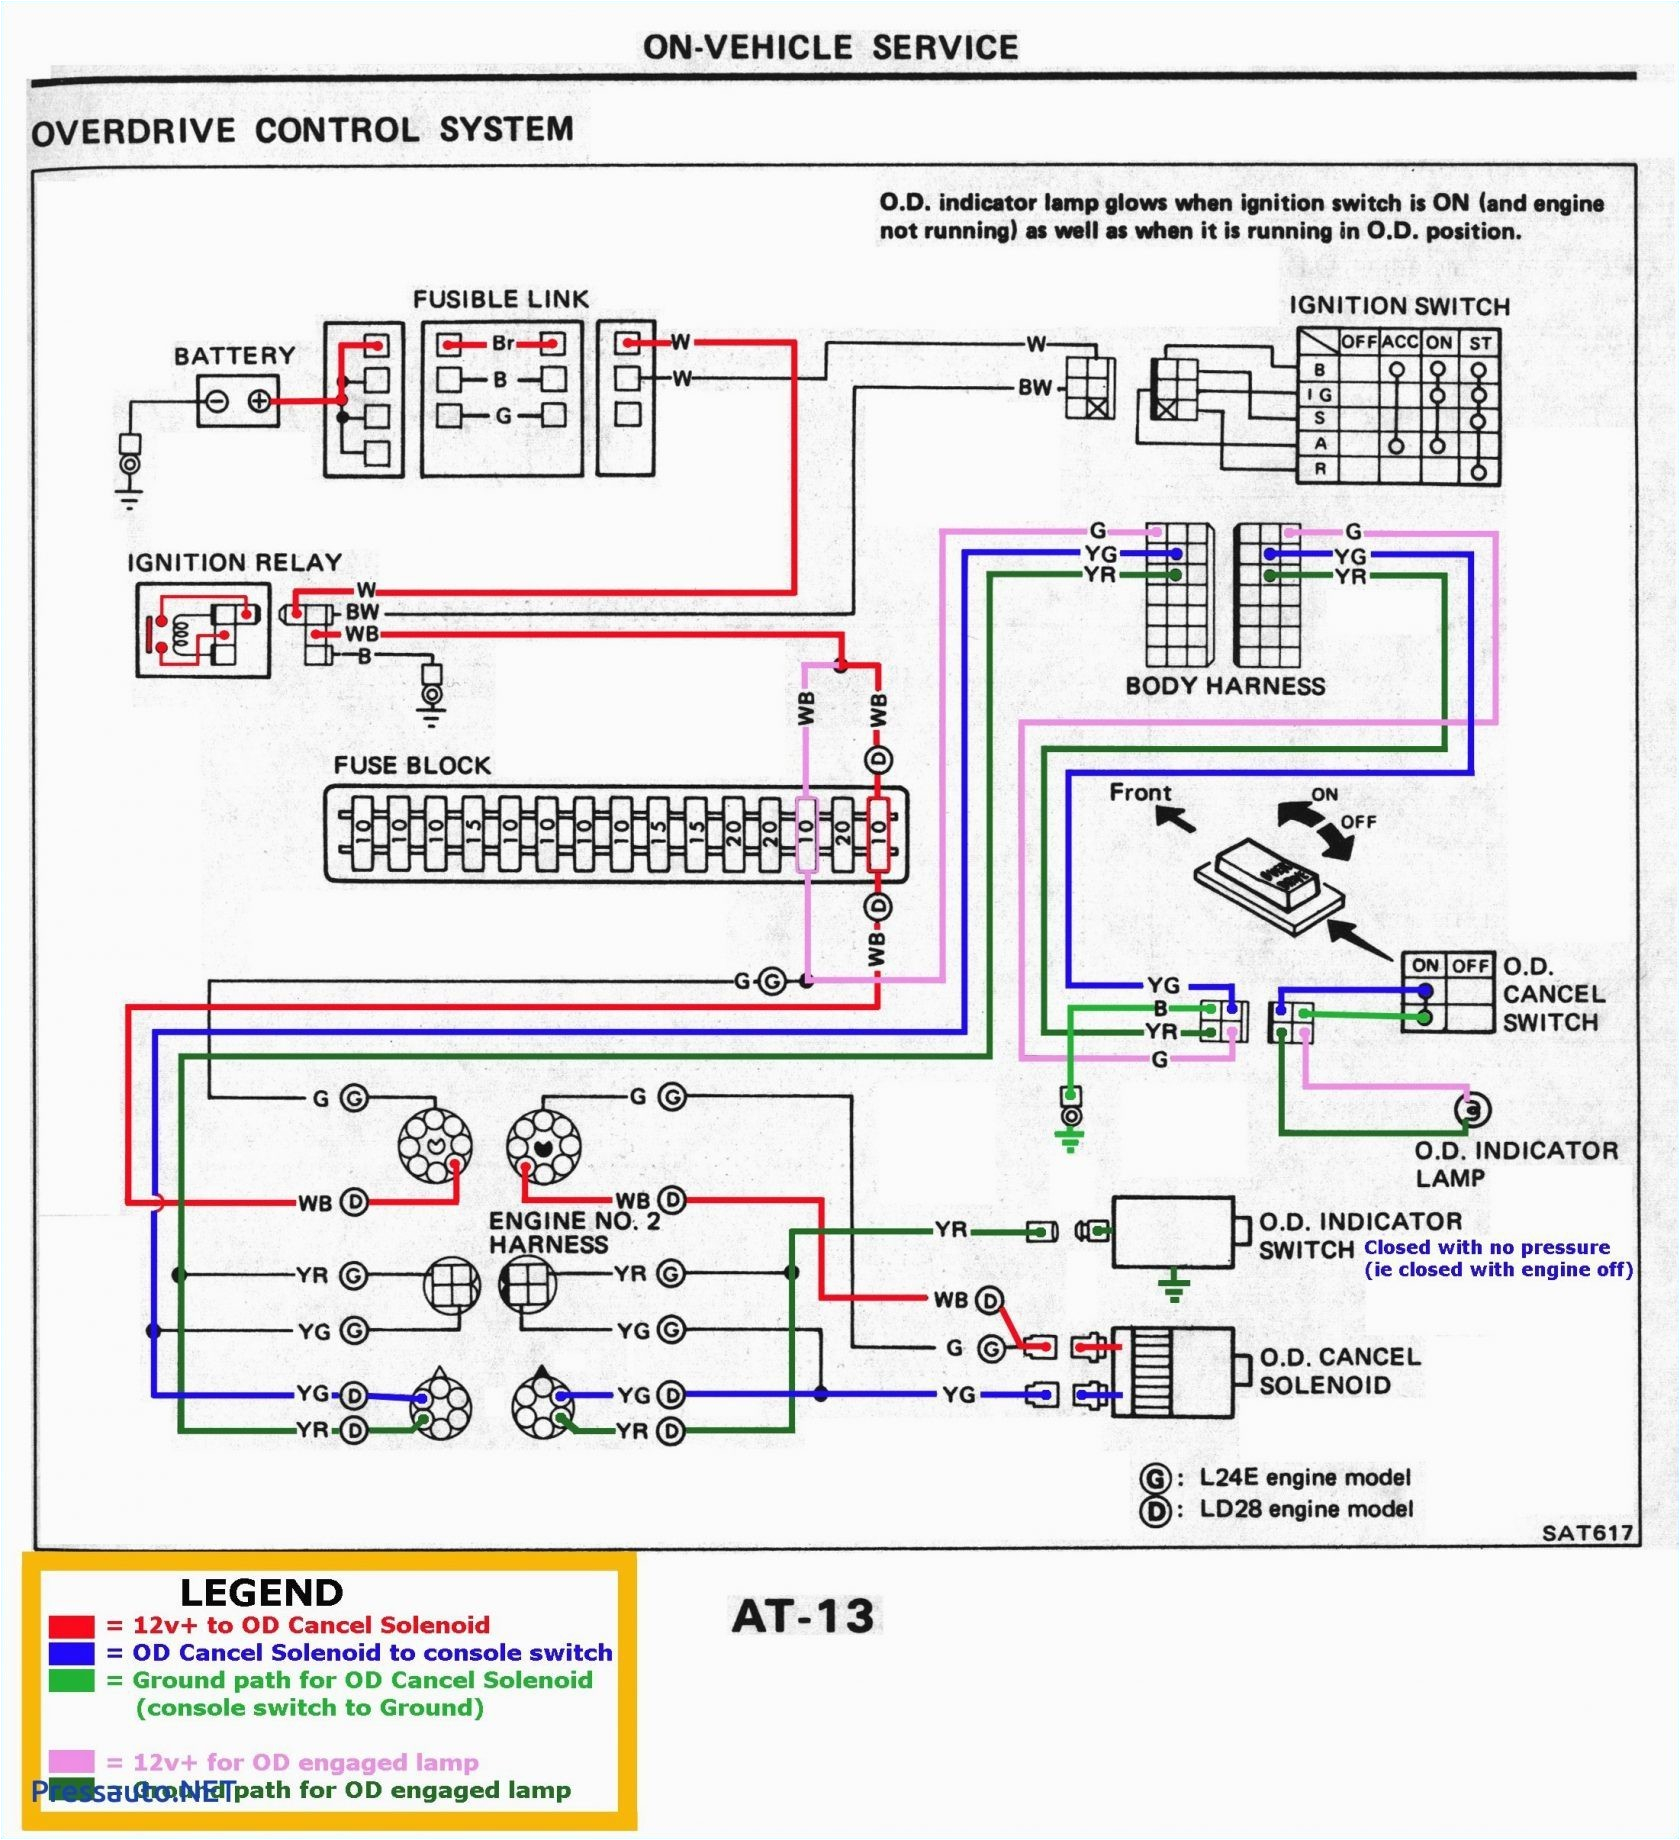 1997 corolla dome light wiring schematic circuit diagram wiring car stereo wiring harness diagram in addition toyota dome light wiring